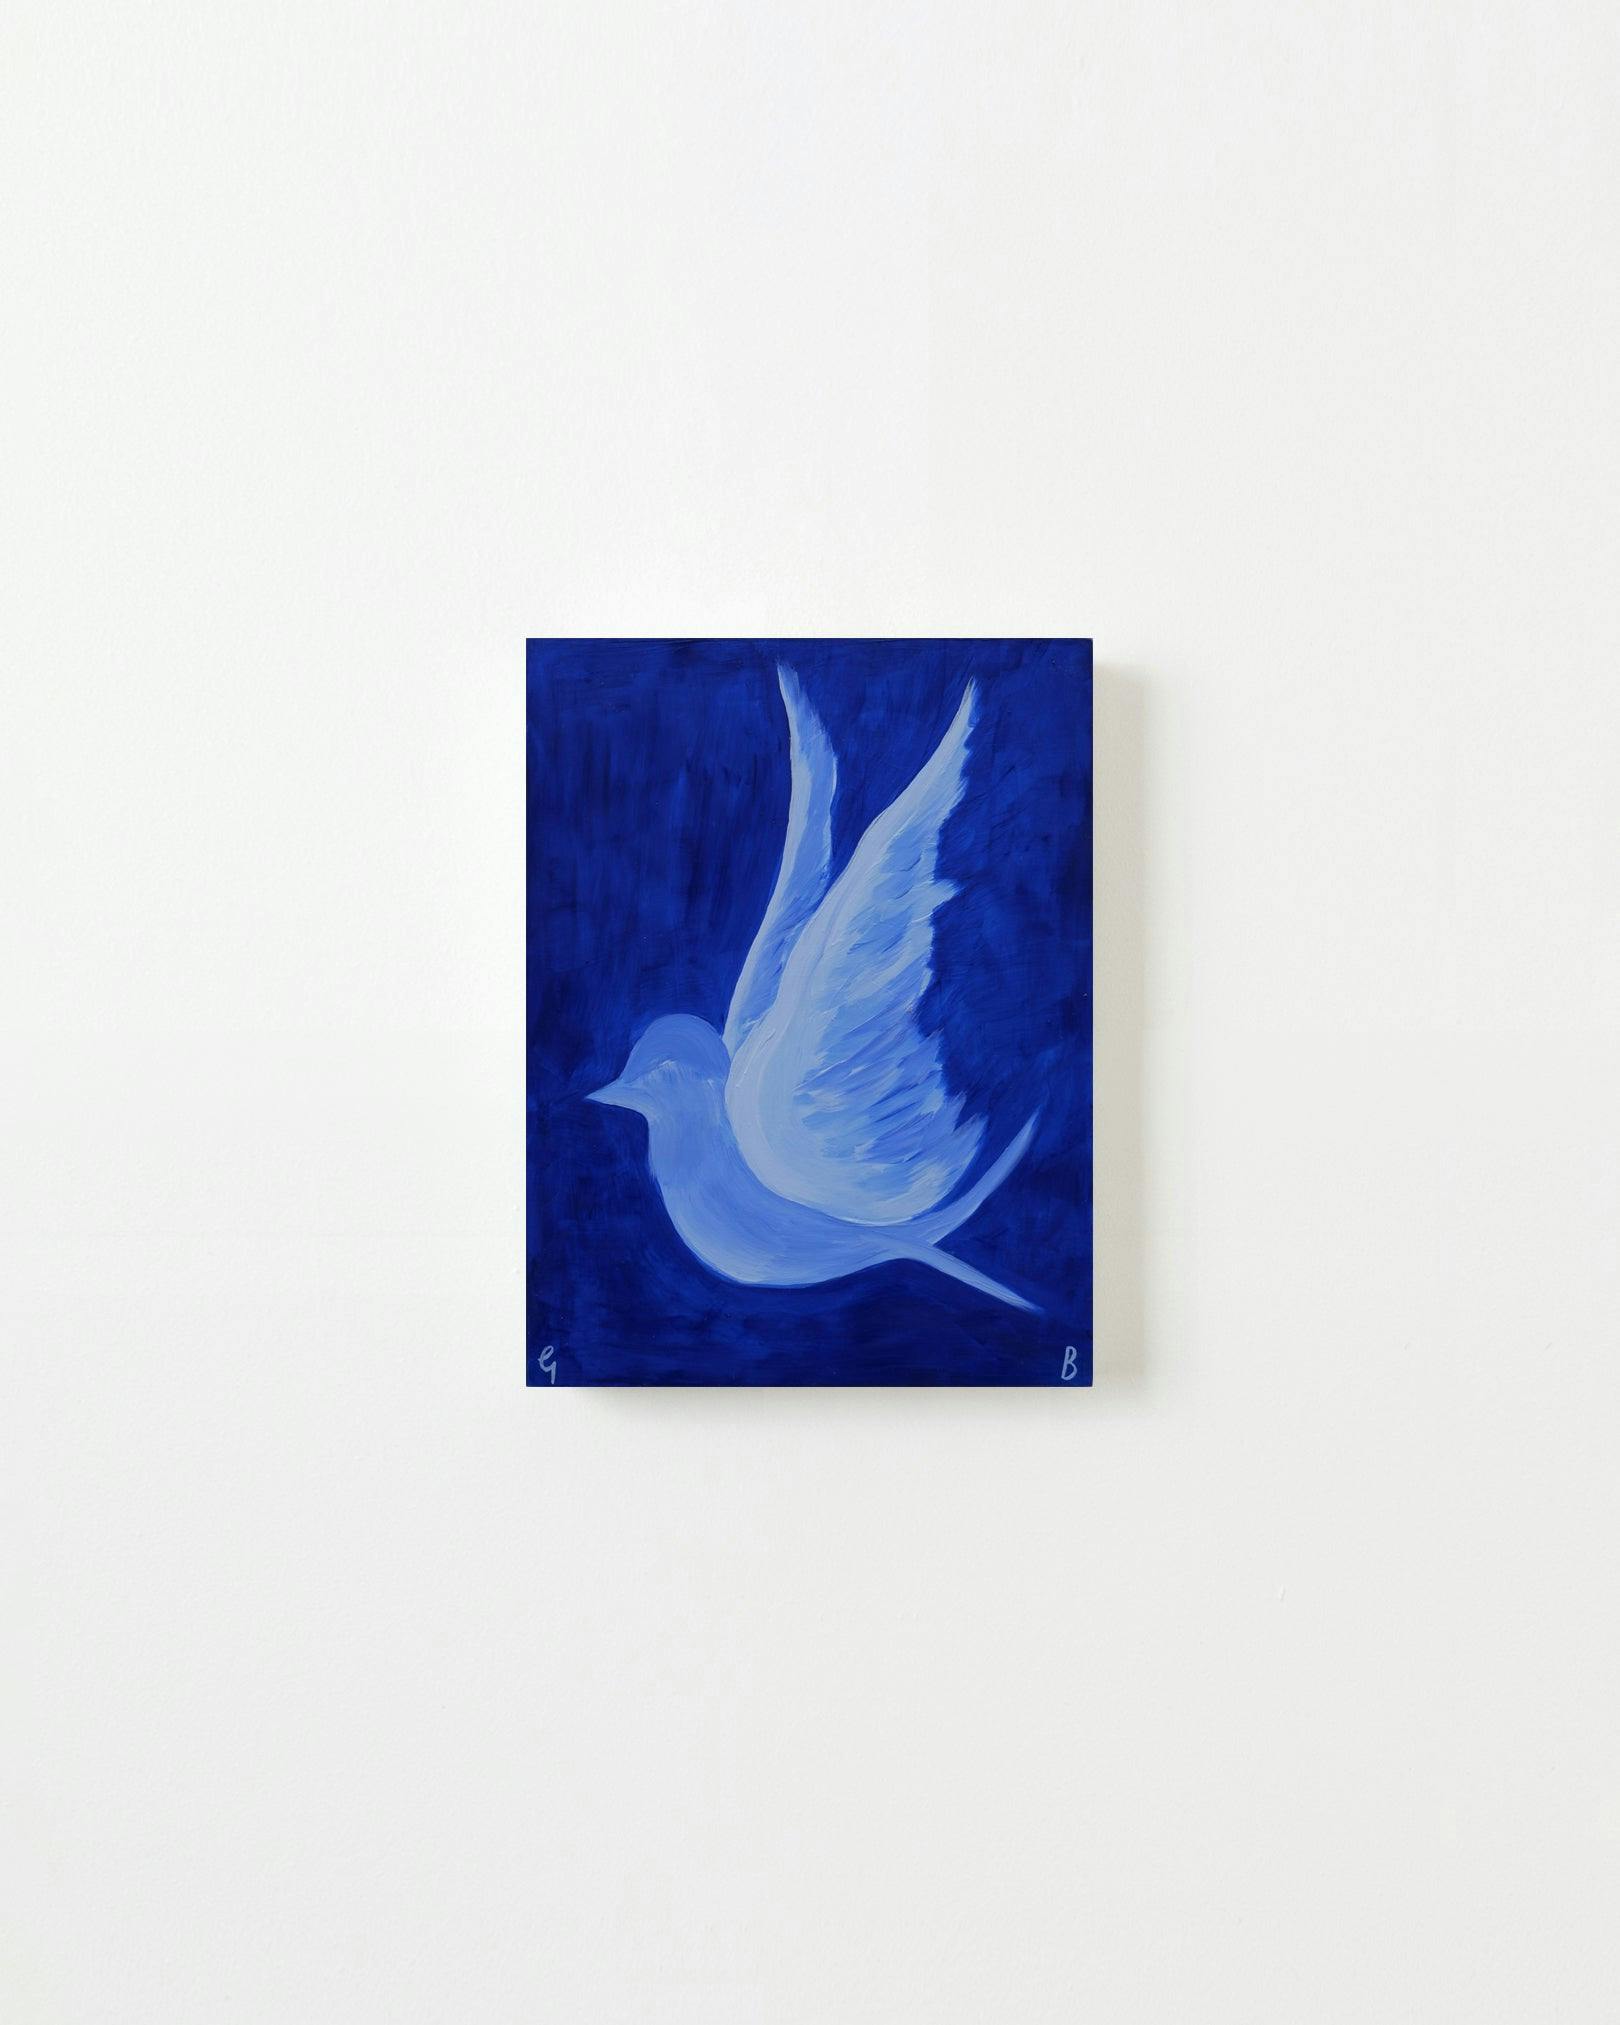 Painting by Georgia Beaumont titled "Blue Bird on Ultramarine".